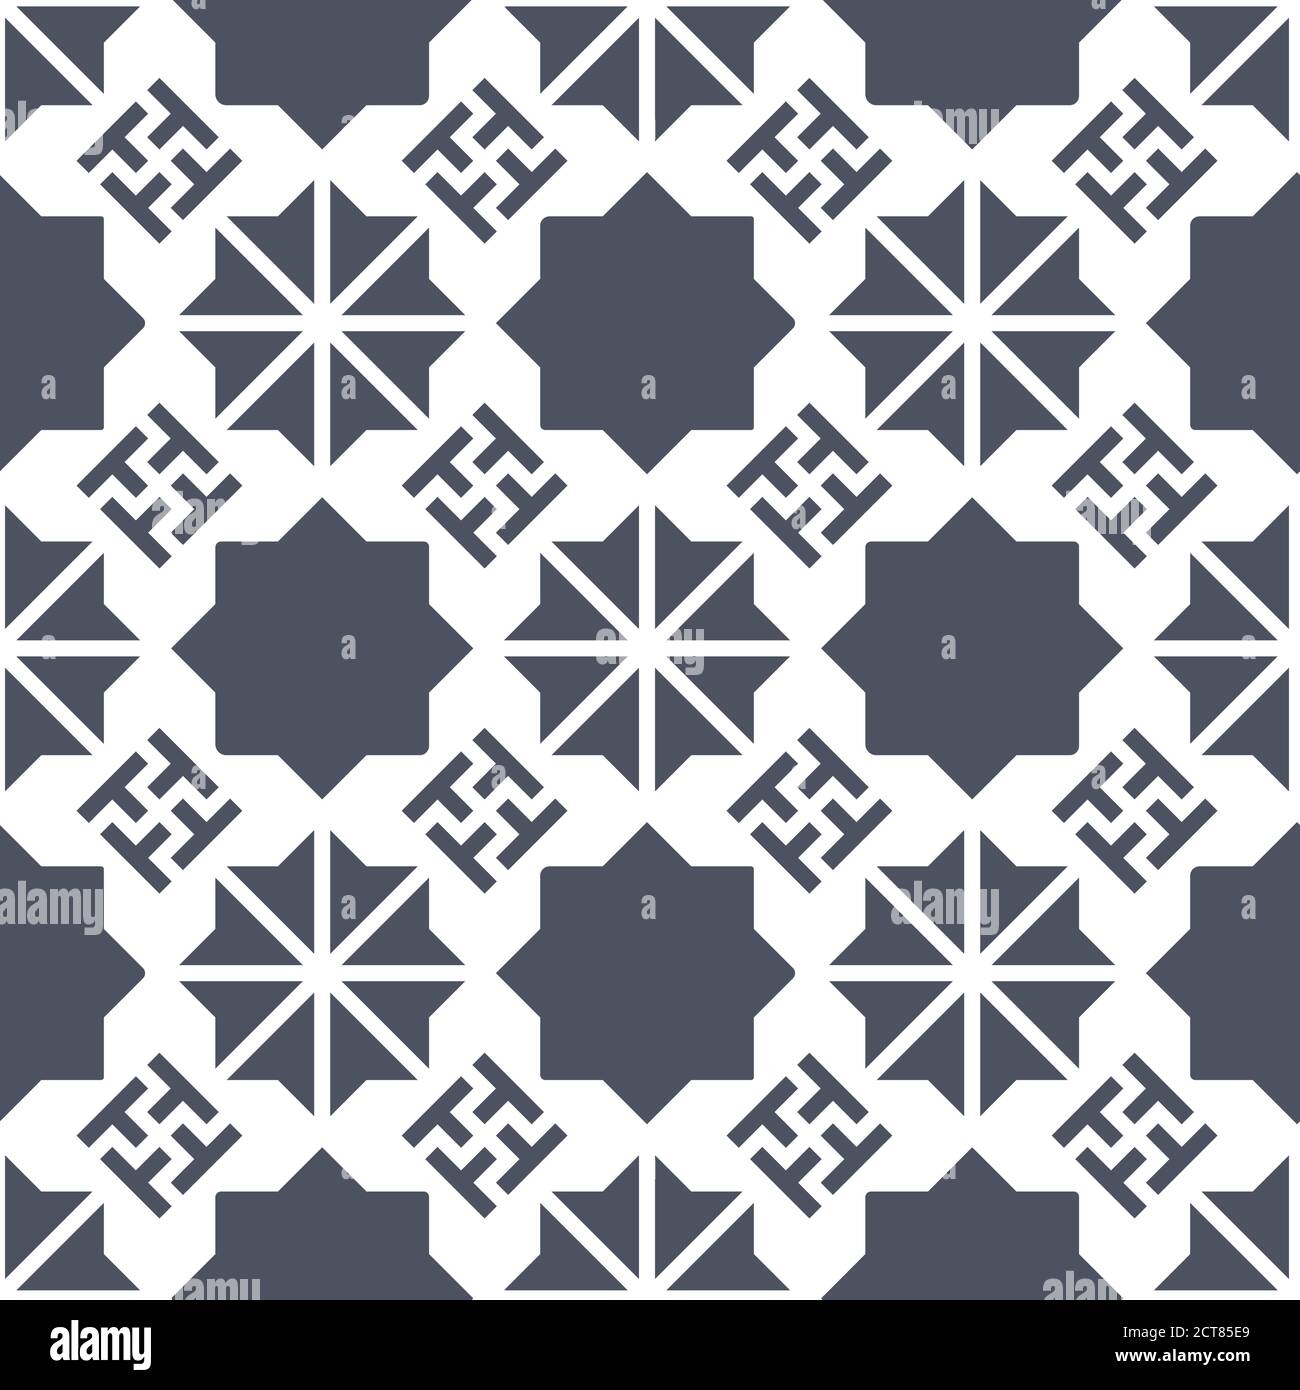 Grey geometric vector pattern. Seamless geometric repeating texture for fabric design, cloth, textile Stock Vector